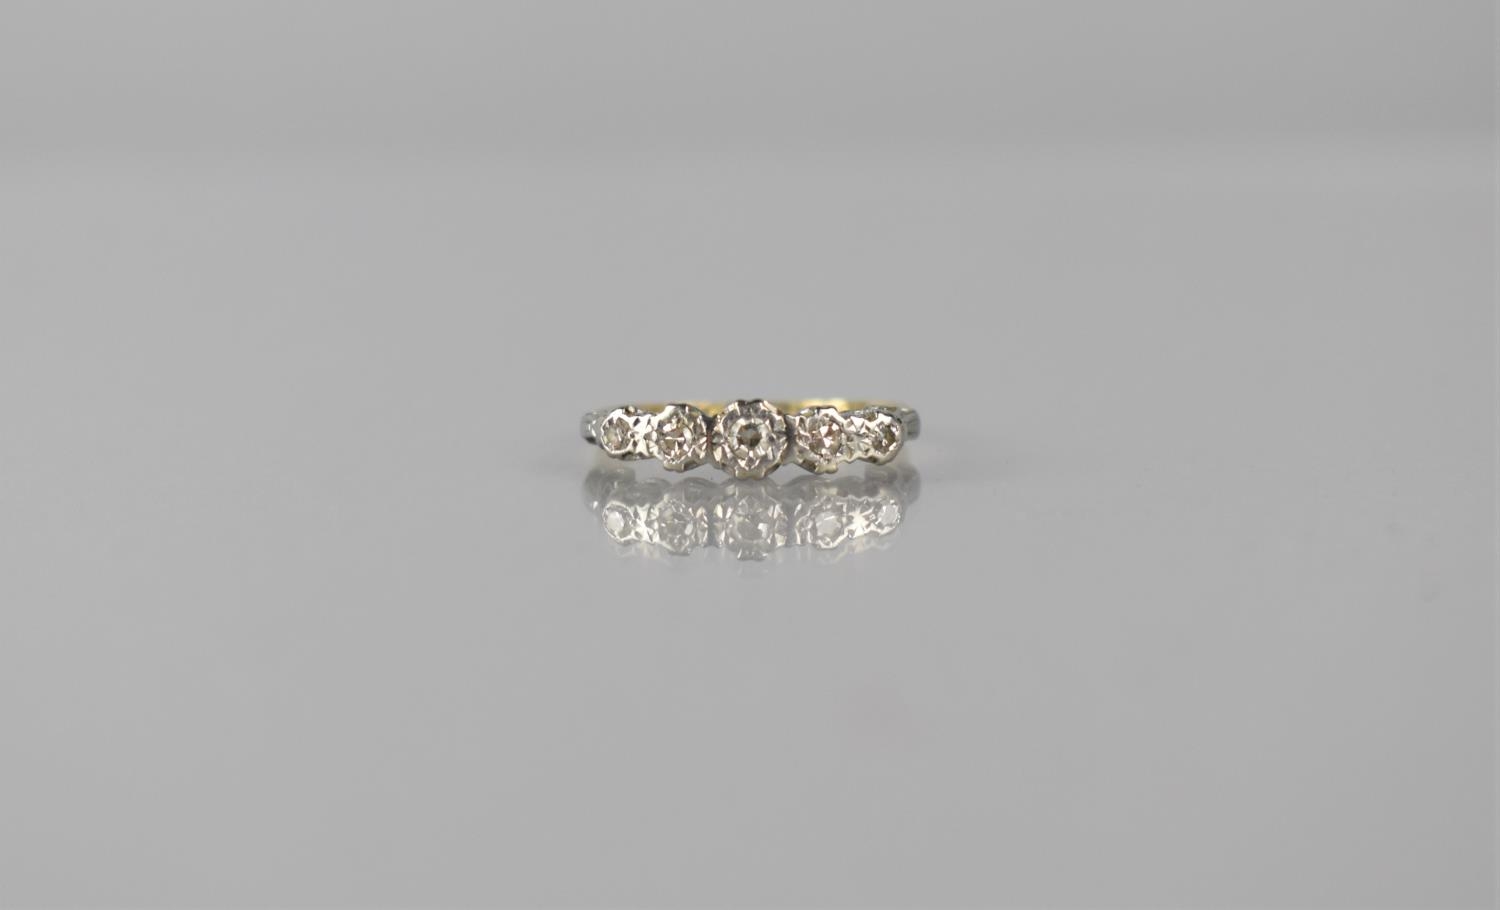 An Early/Mid 20th Century 18ct Gold, Platinum and Five Stone Diamond Ring, Old European Cut Diamonds